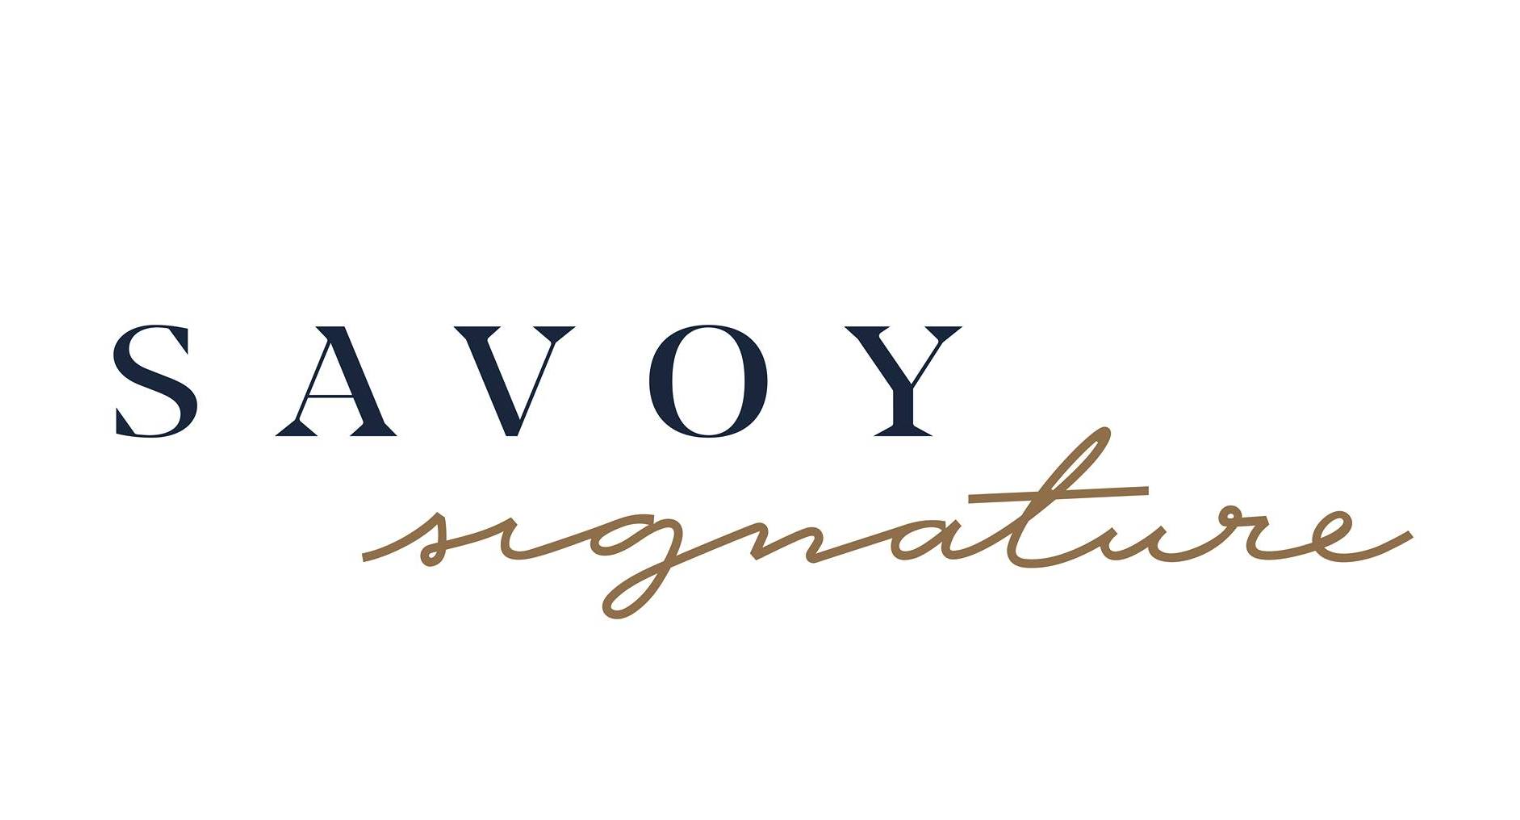 Savoy Signature partnering with THIRDHOME